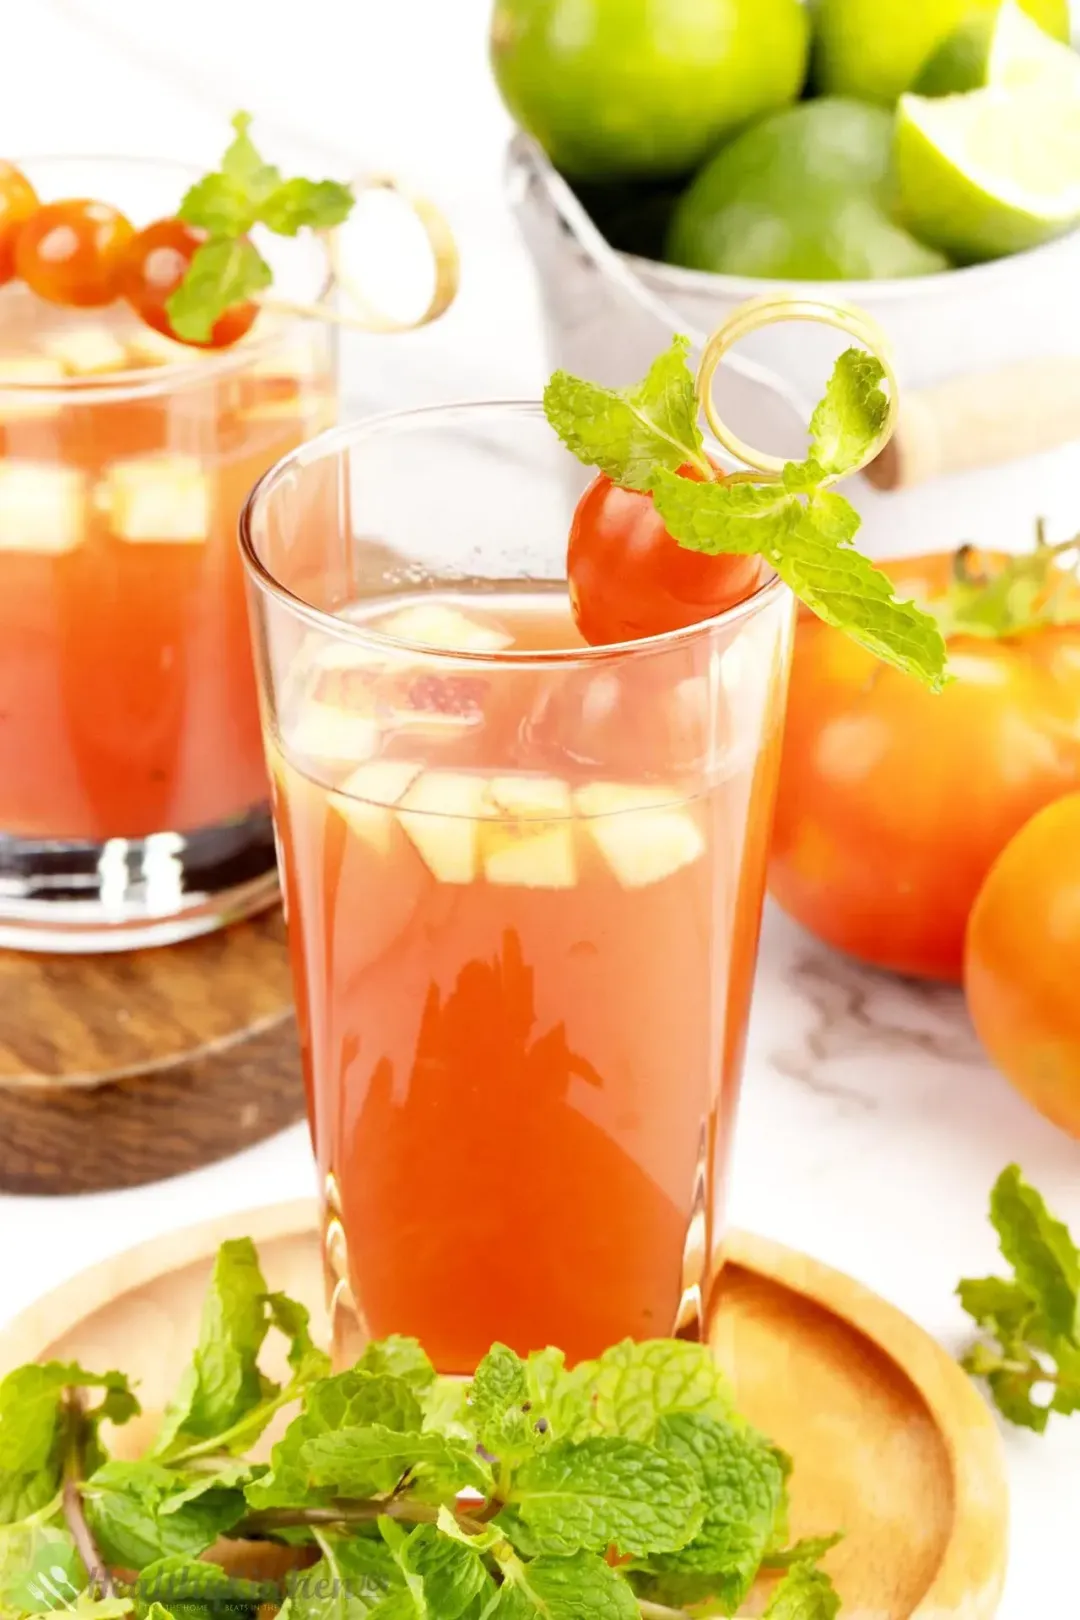 Is This Tomato Cocktail Healthy